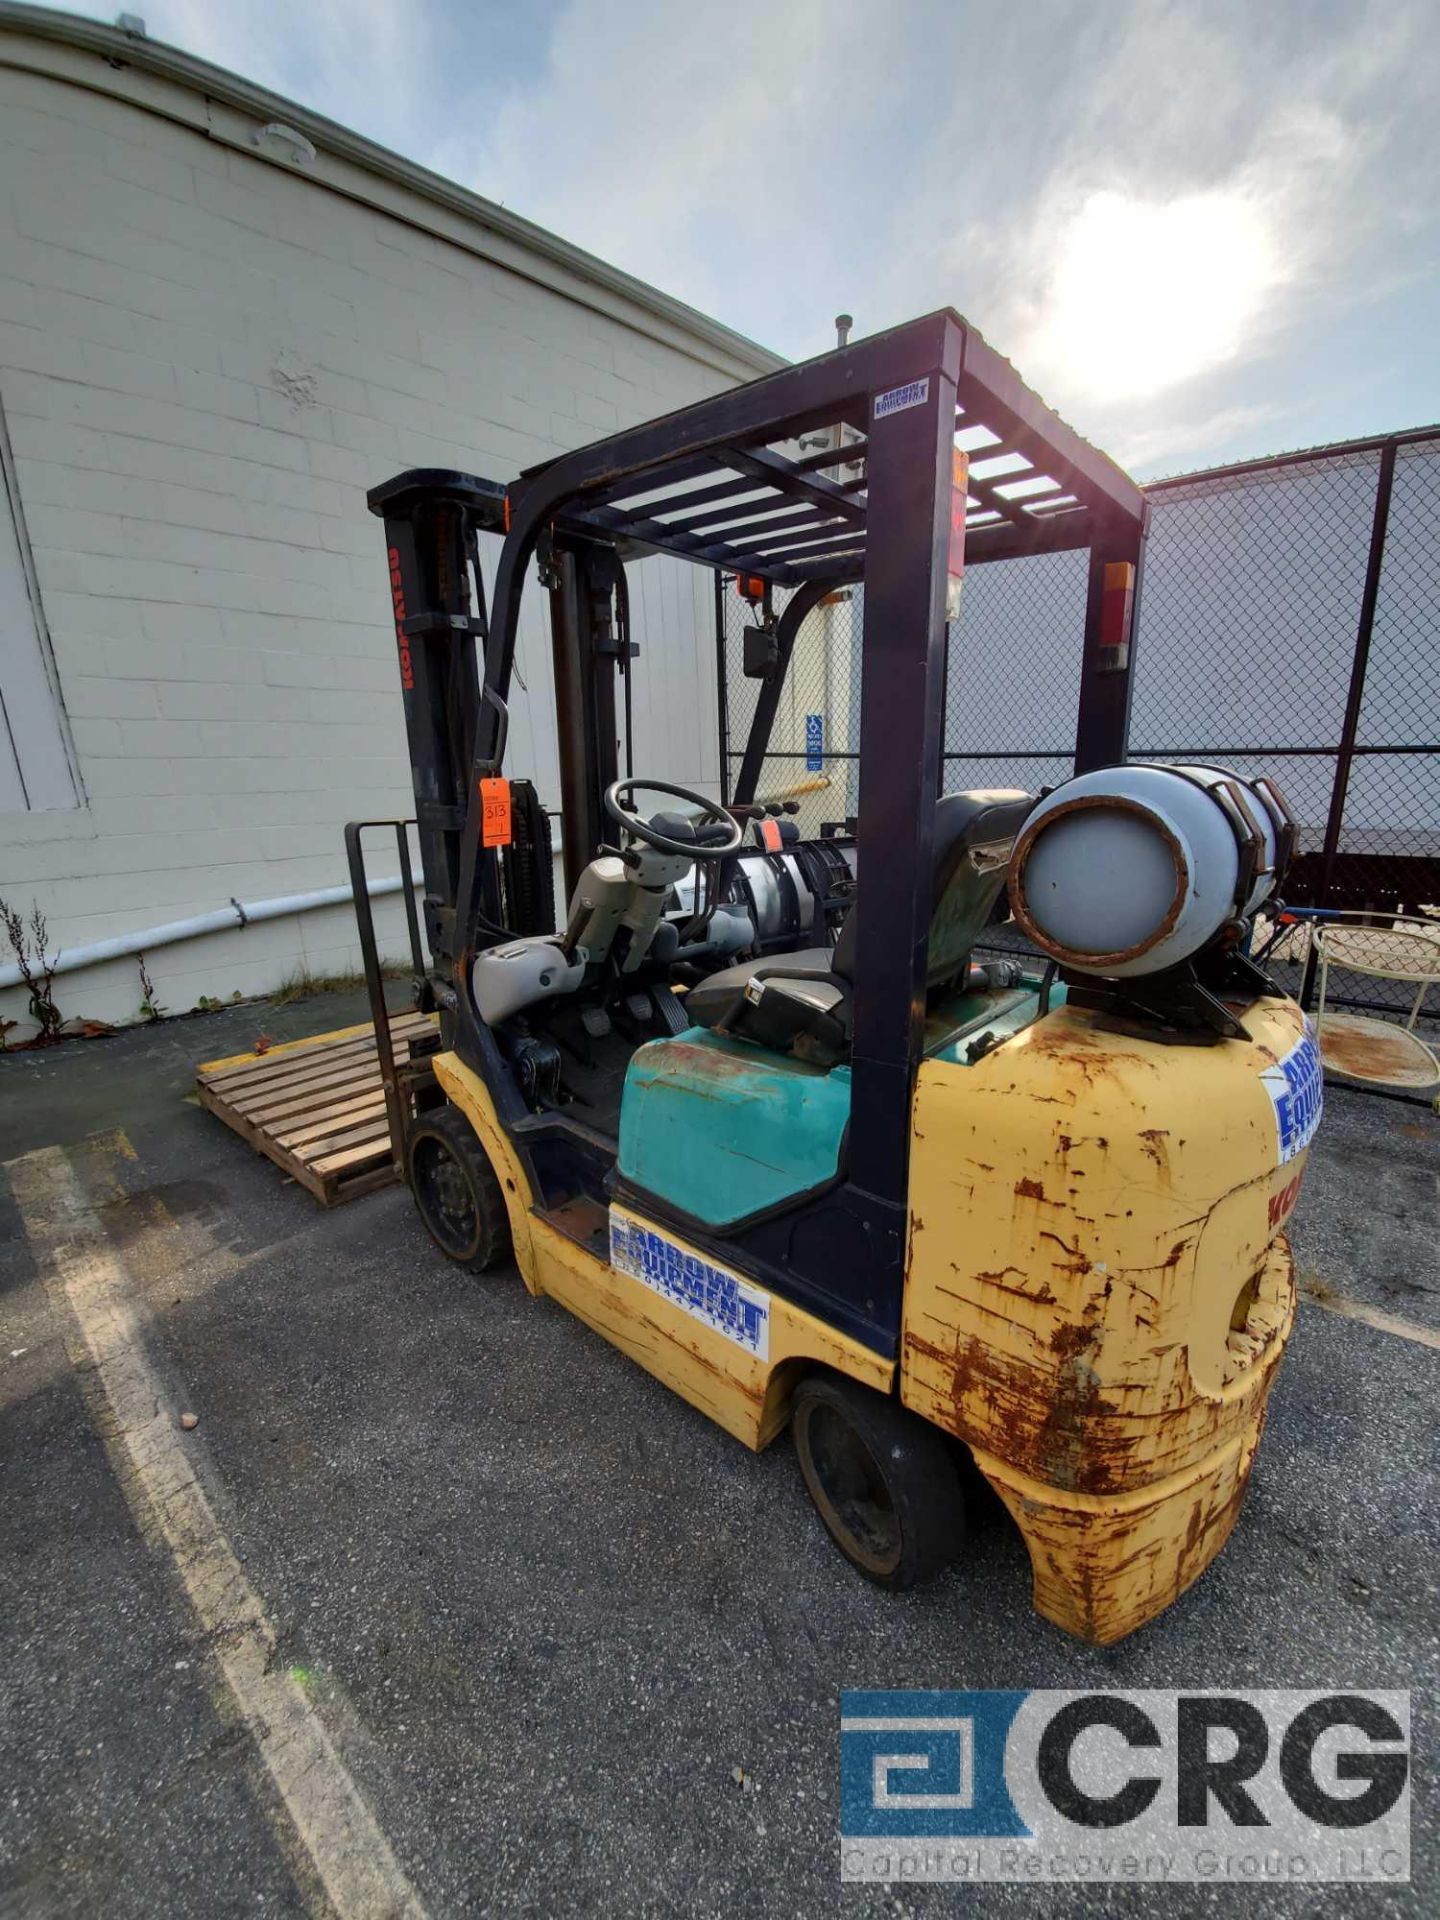 Komatsu LP forklift, 4500# cap., 5776 hours, ROPS, solid tires, 3 stage mast, 188 inch lift